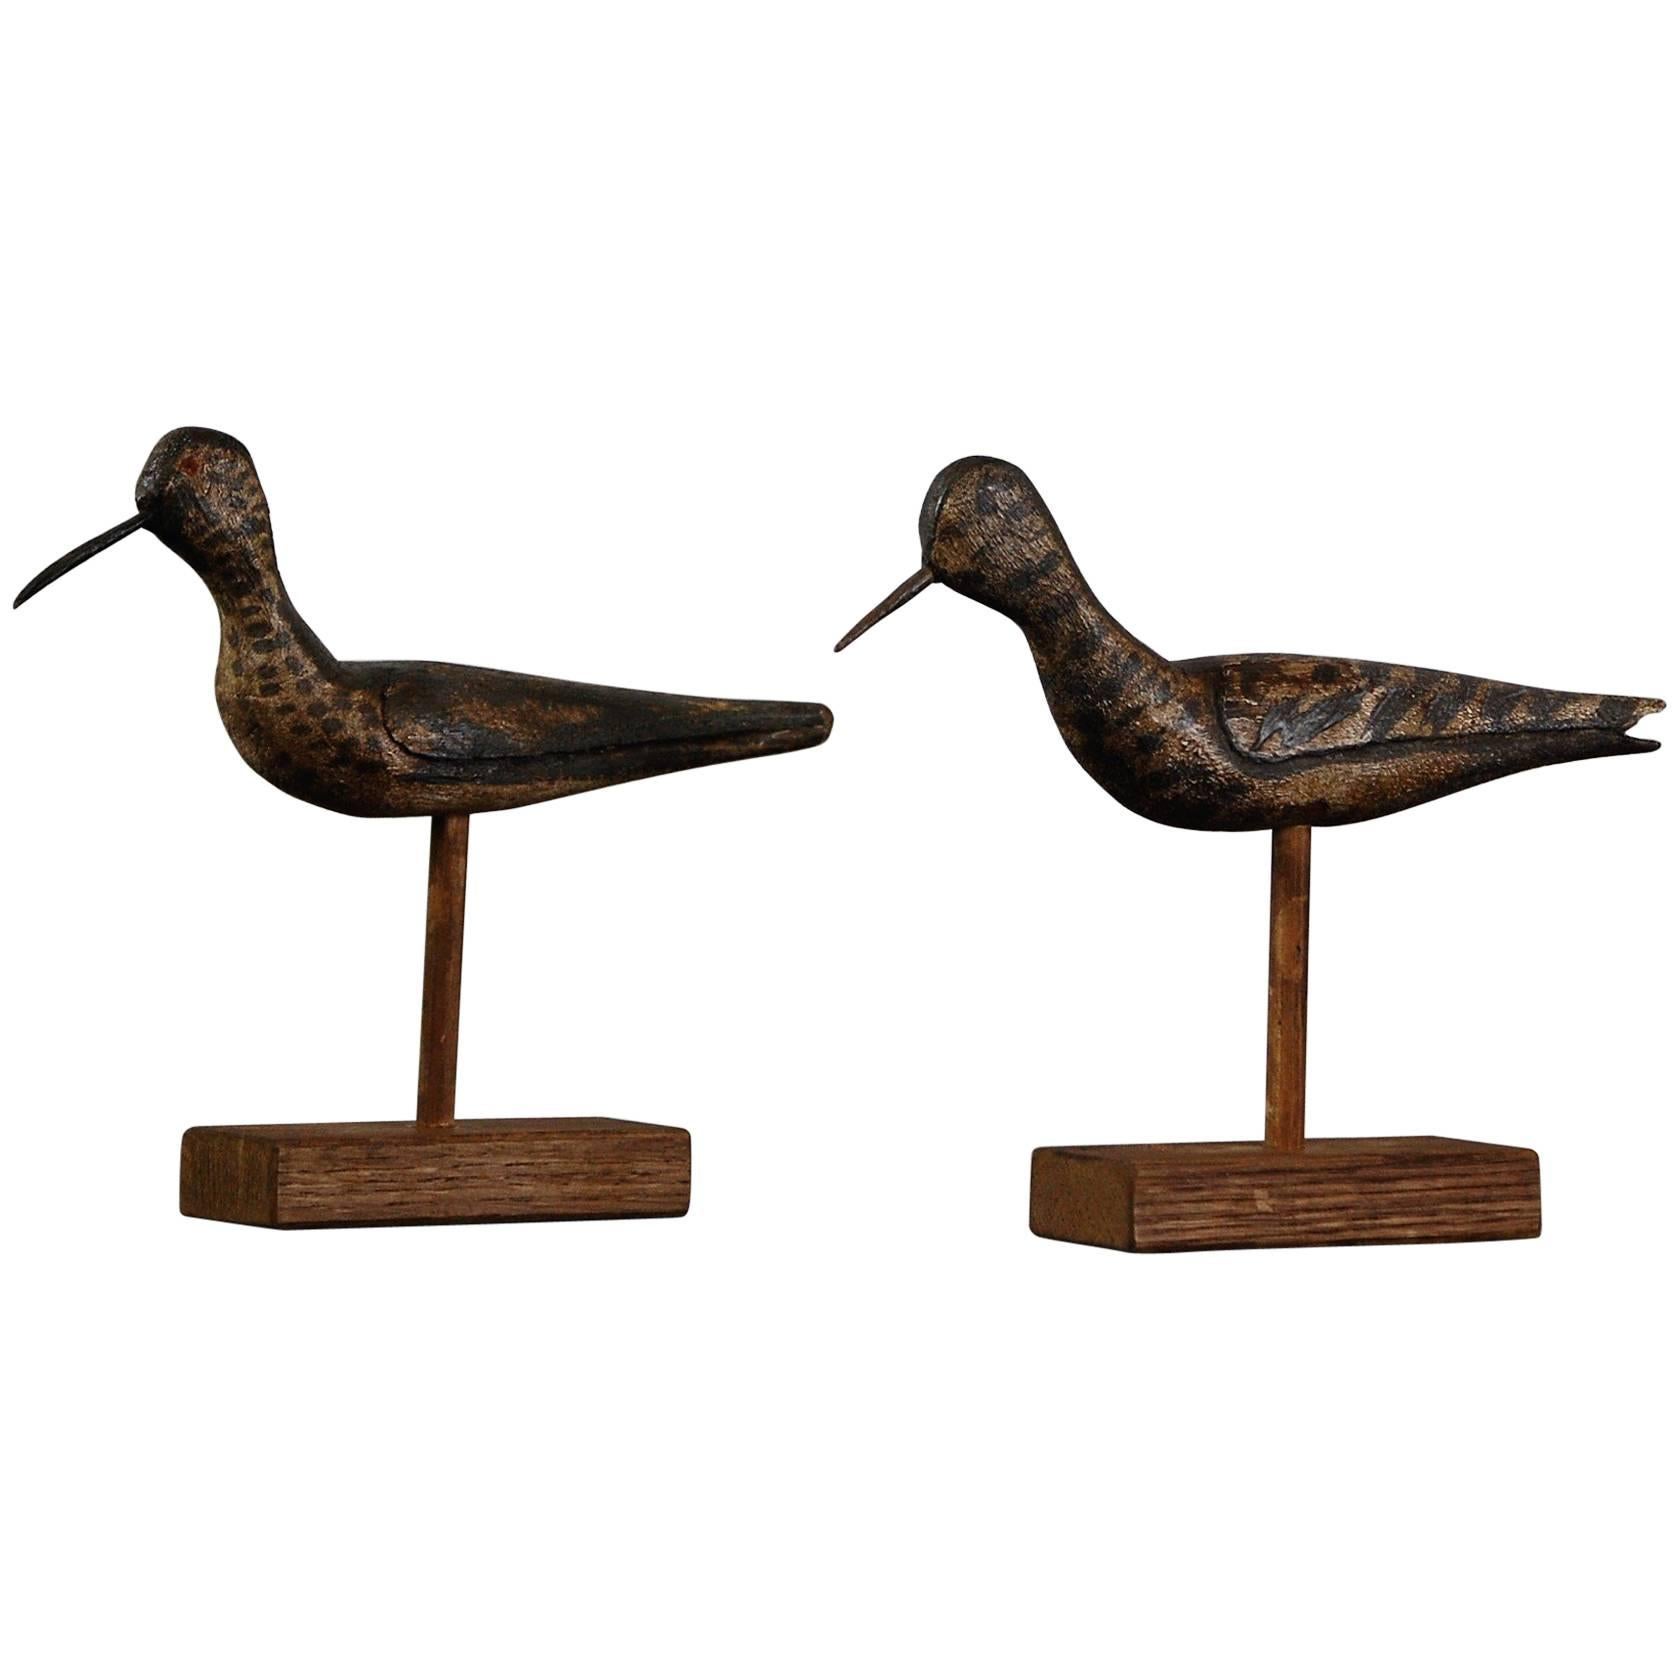 Pair of Early 20th Century Sandpiper Working Decoys